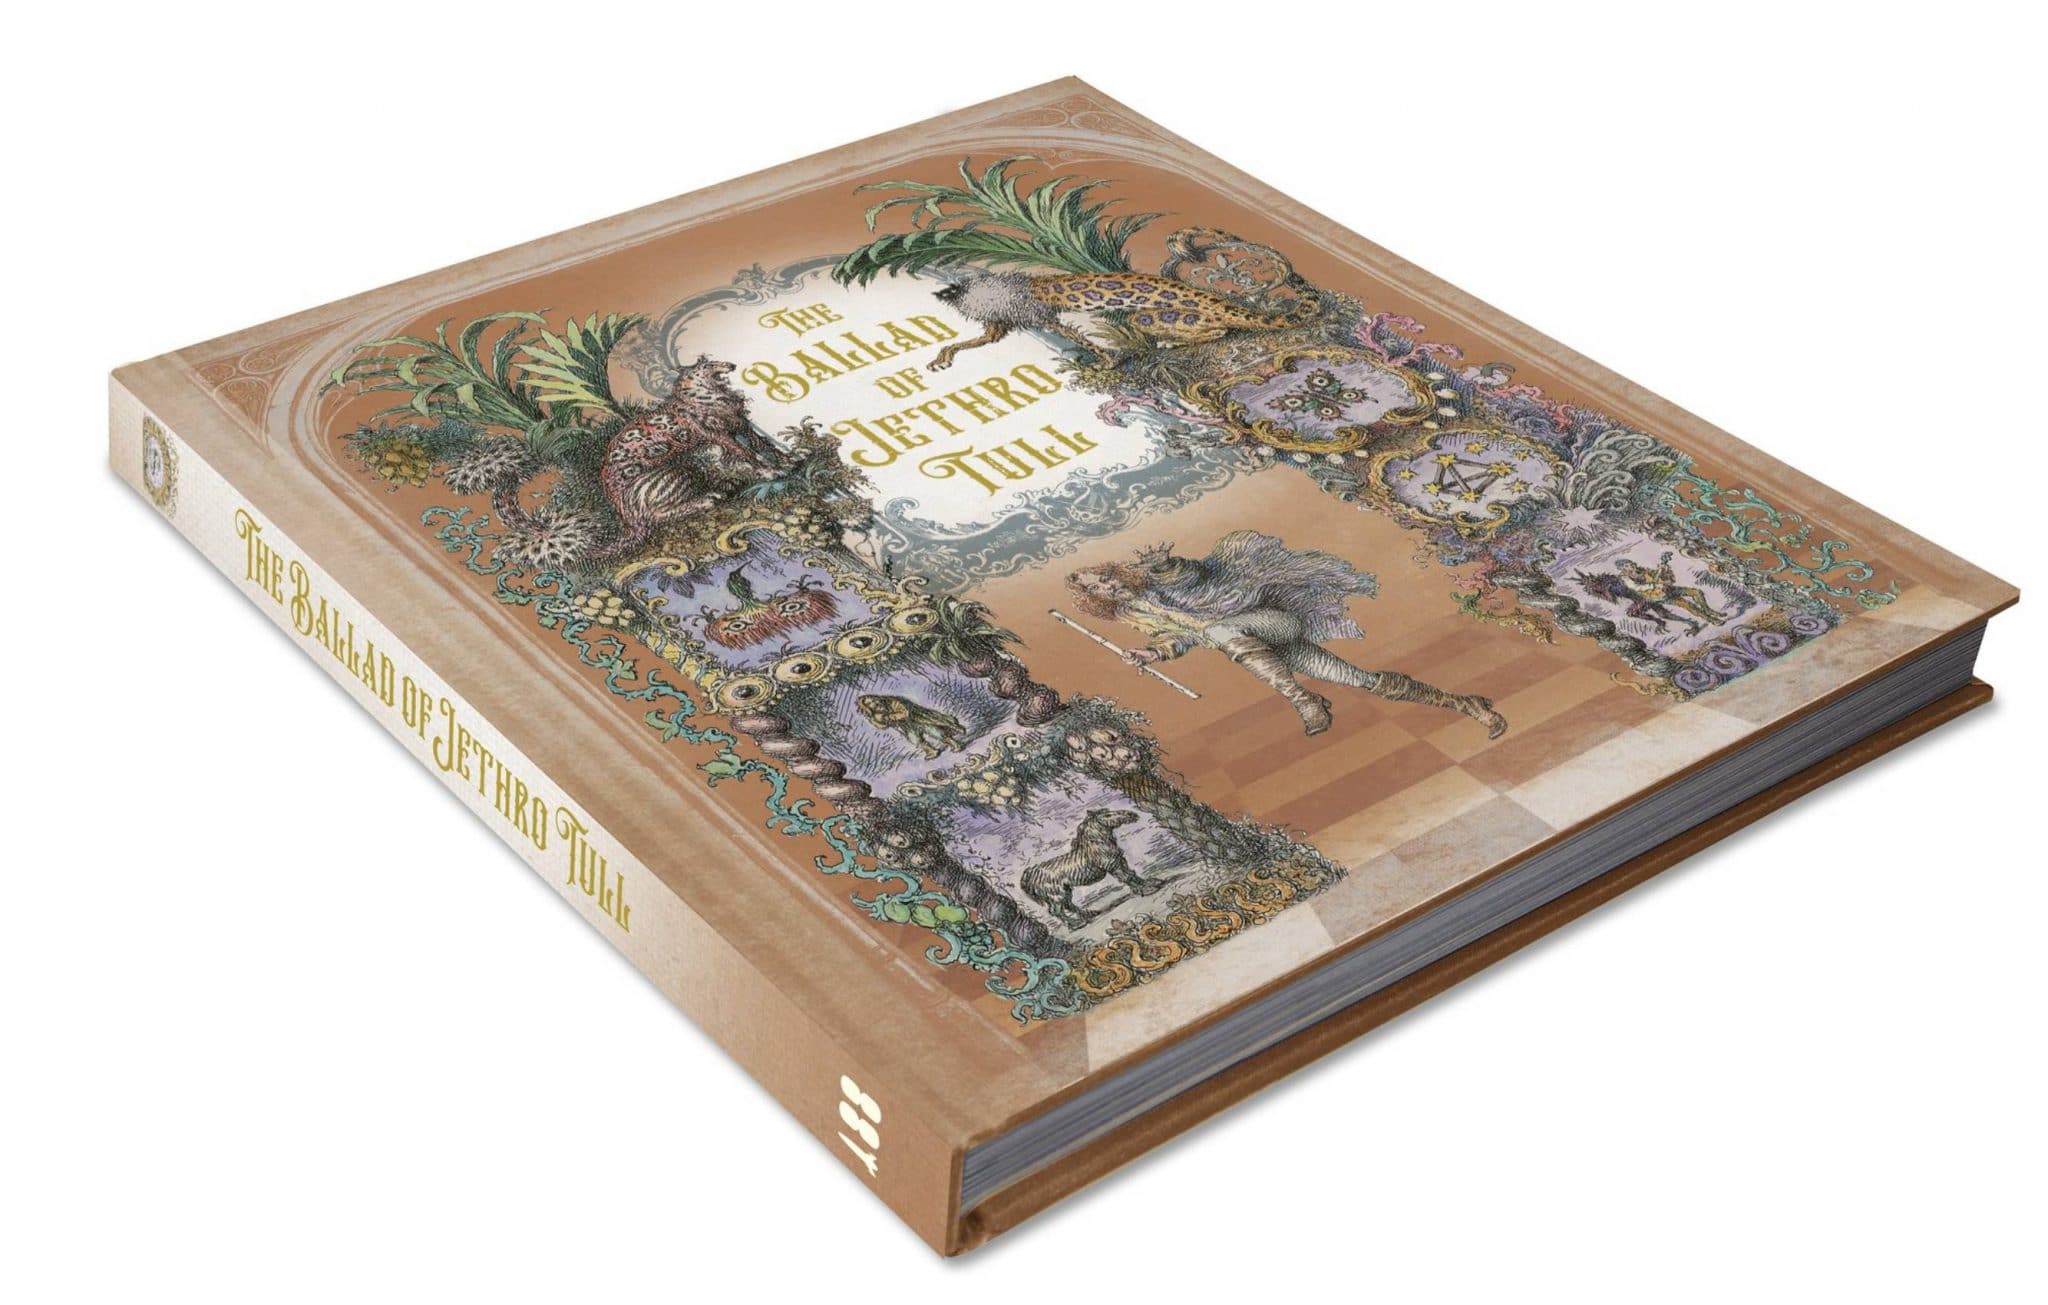 Ian Anderson Unveils the Ballad of Jethro Tull Book!